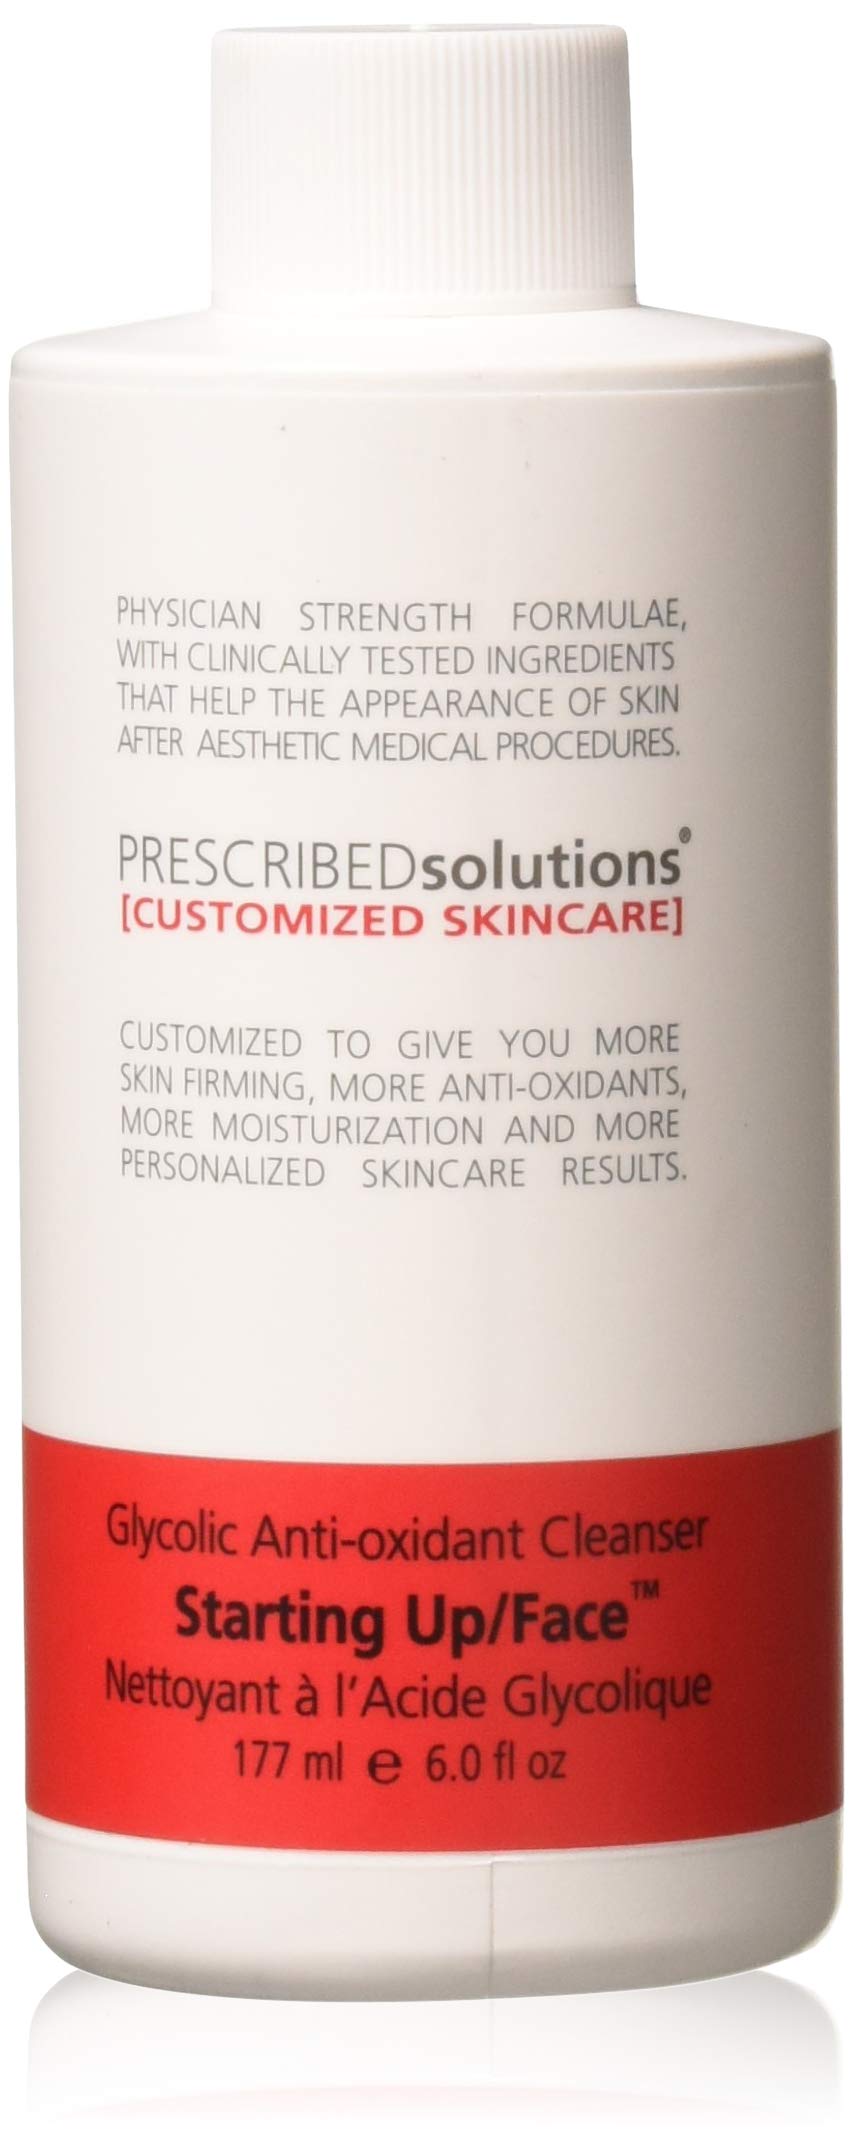 PRESCRIBEDsolutions Starting Up/Face® – Glycolic Anti-Oxidant Cleanser